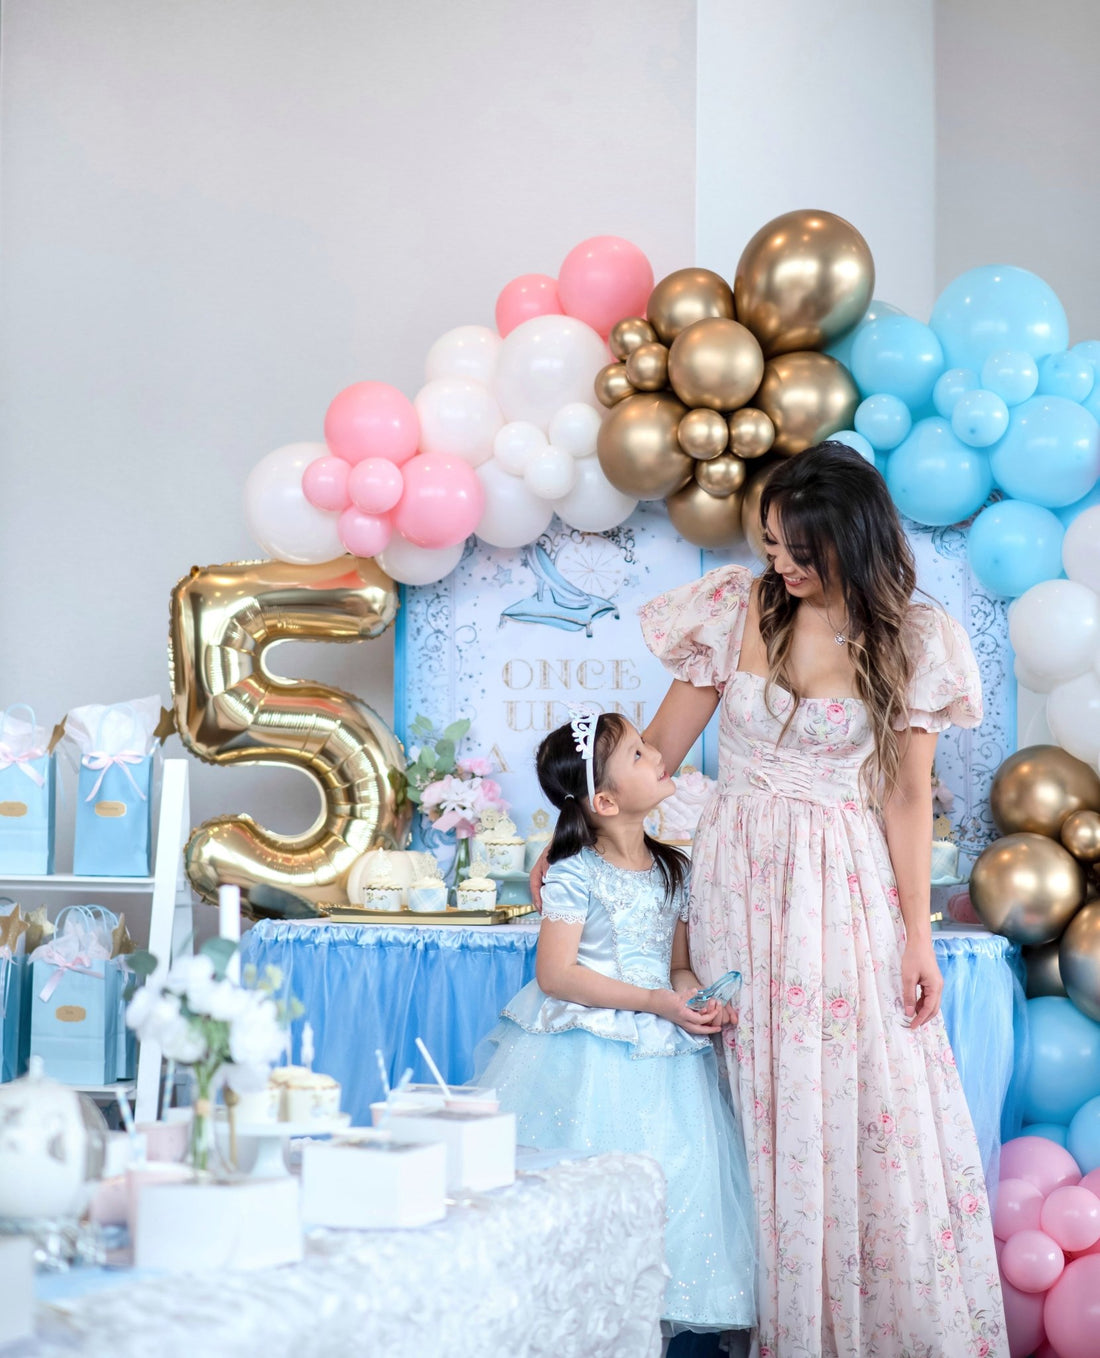 Top 5 Fifth Birthday  Party Themes - Ellie's Party Supply